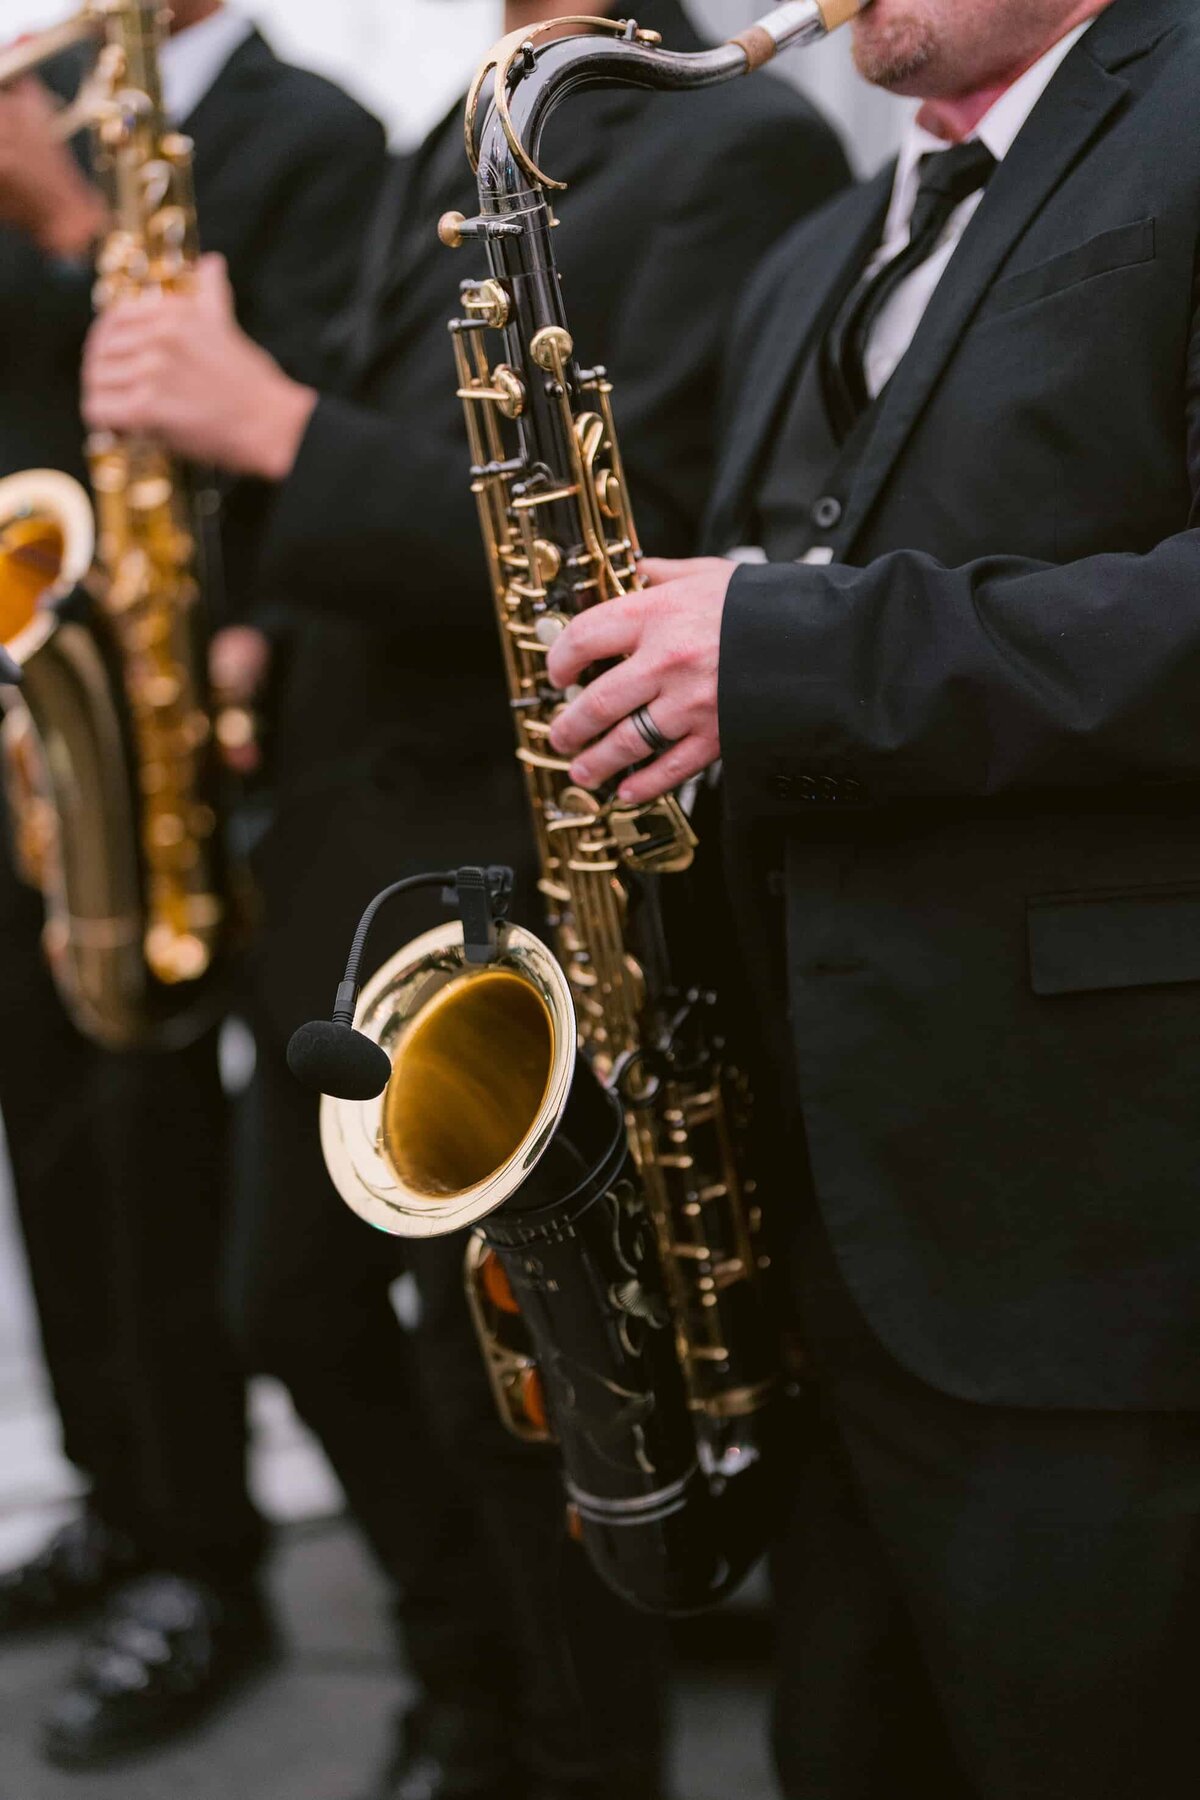 Saxophone players at a black and white wedding in Colorado